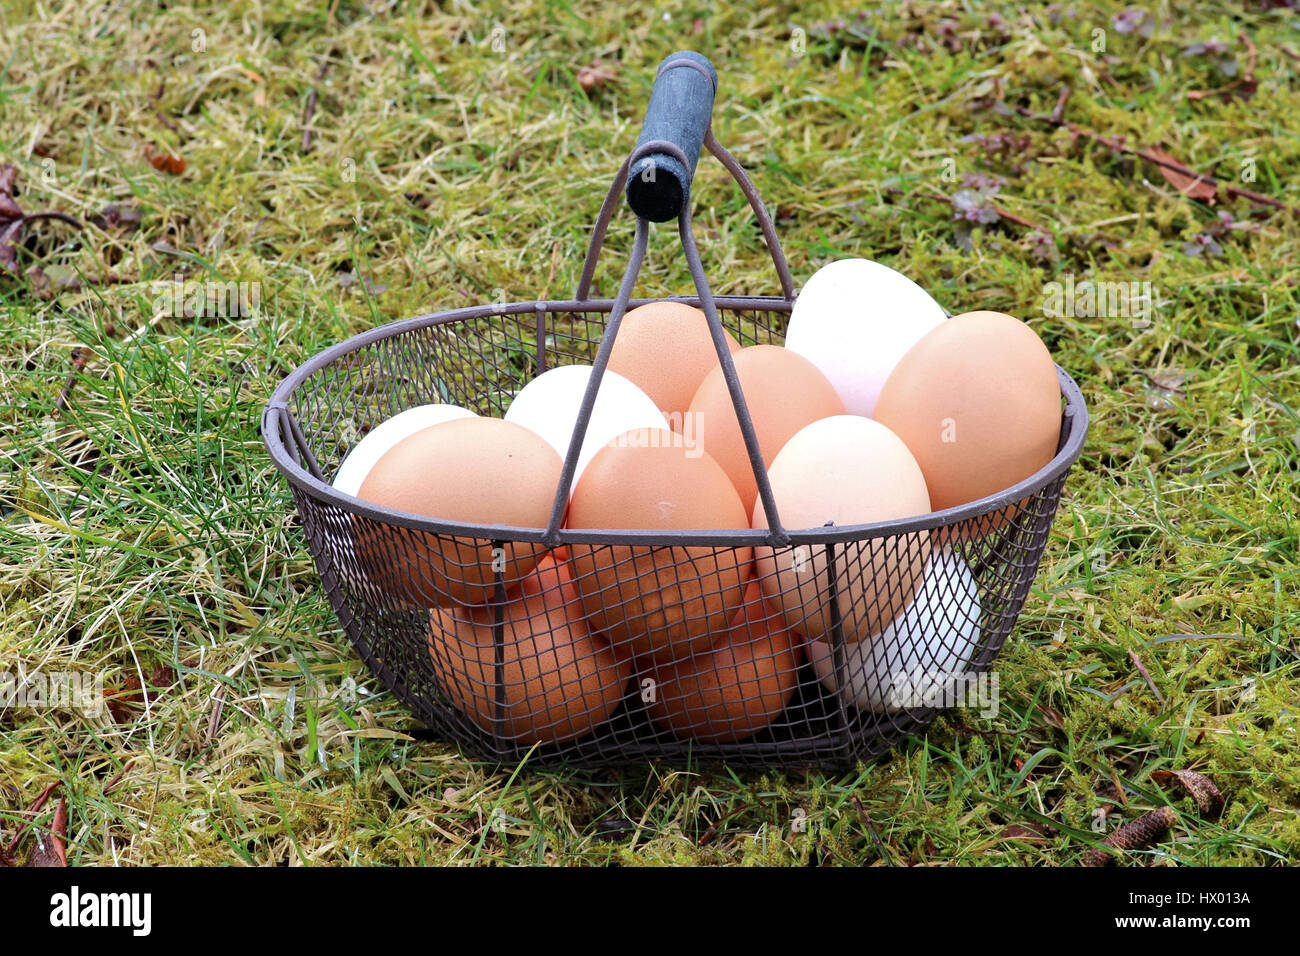 eggs in a basket Stock Photo